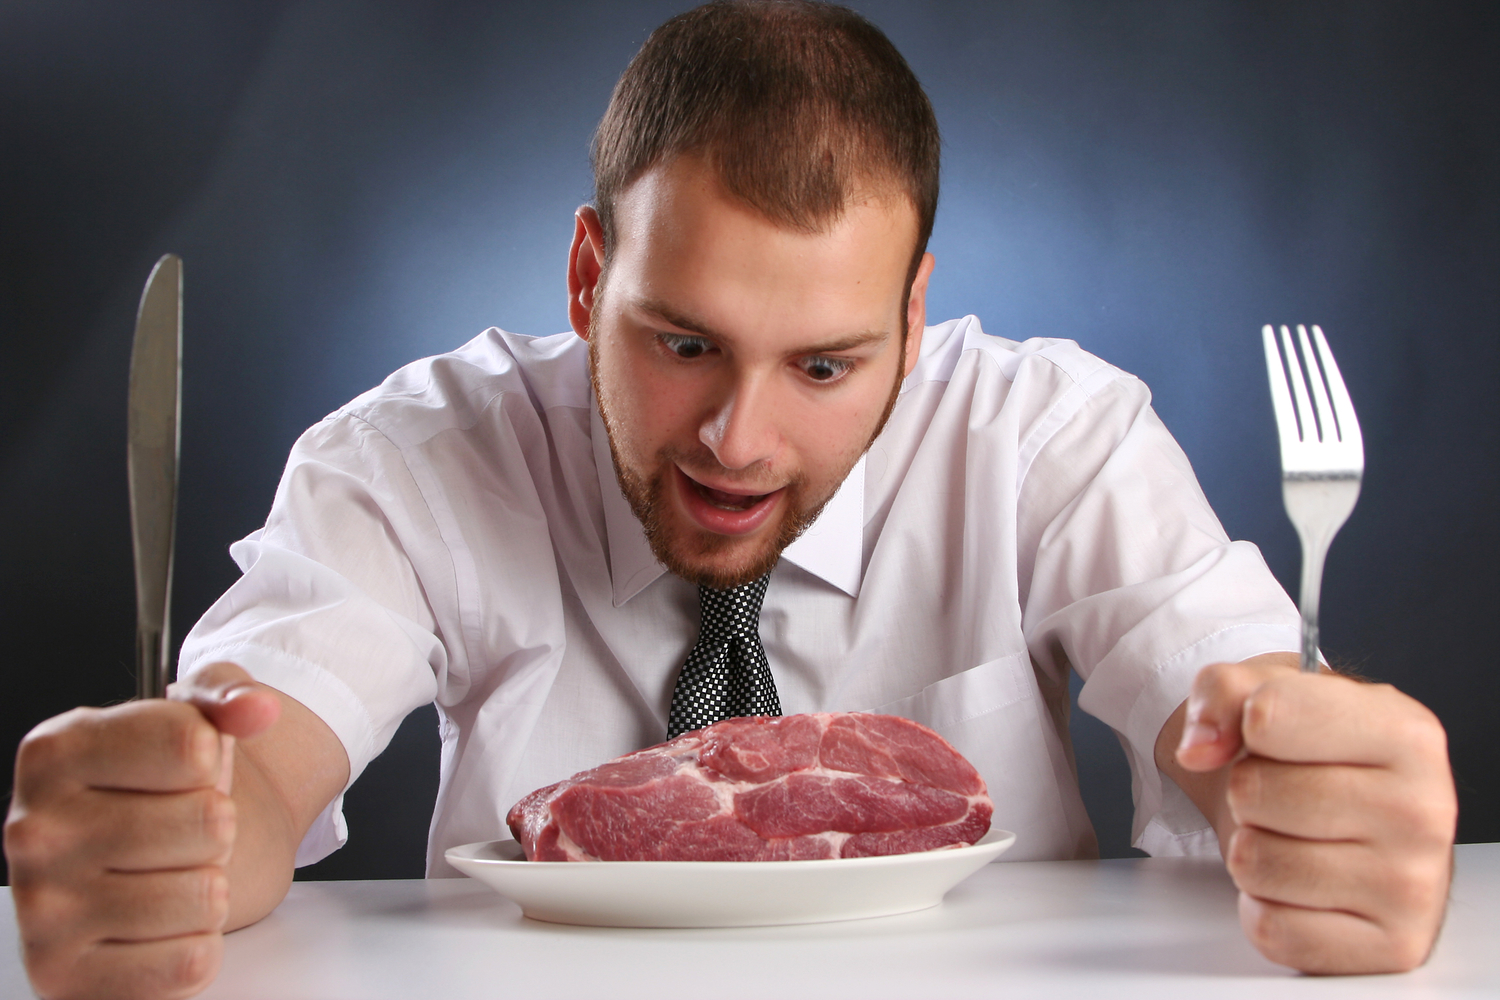 People think beef is manly, and that’s a big problem